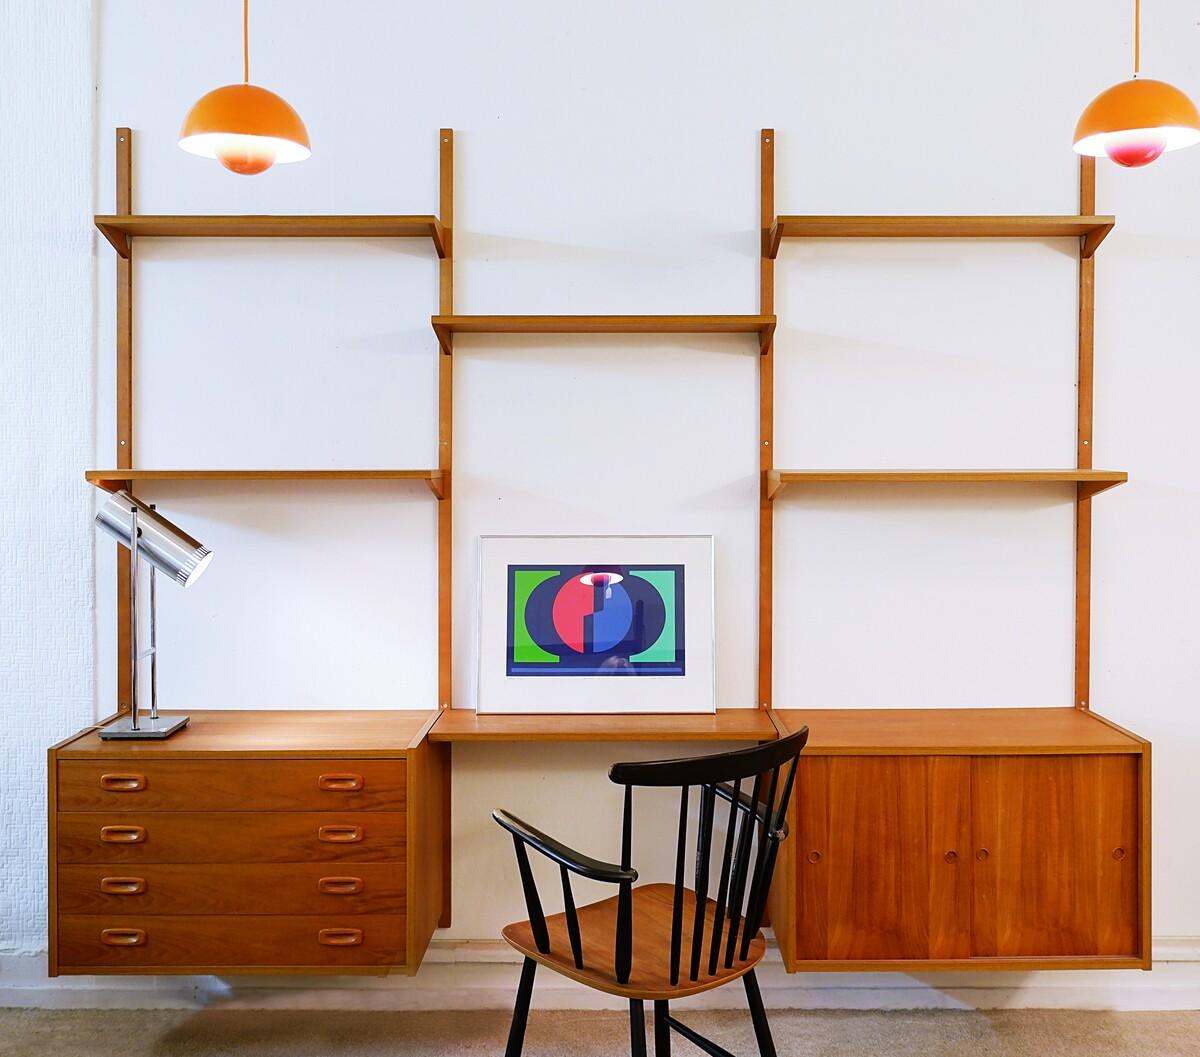 Mid-century Danish wall unit by Peter Sorensen for PS System - 1960s.